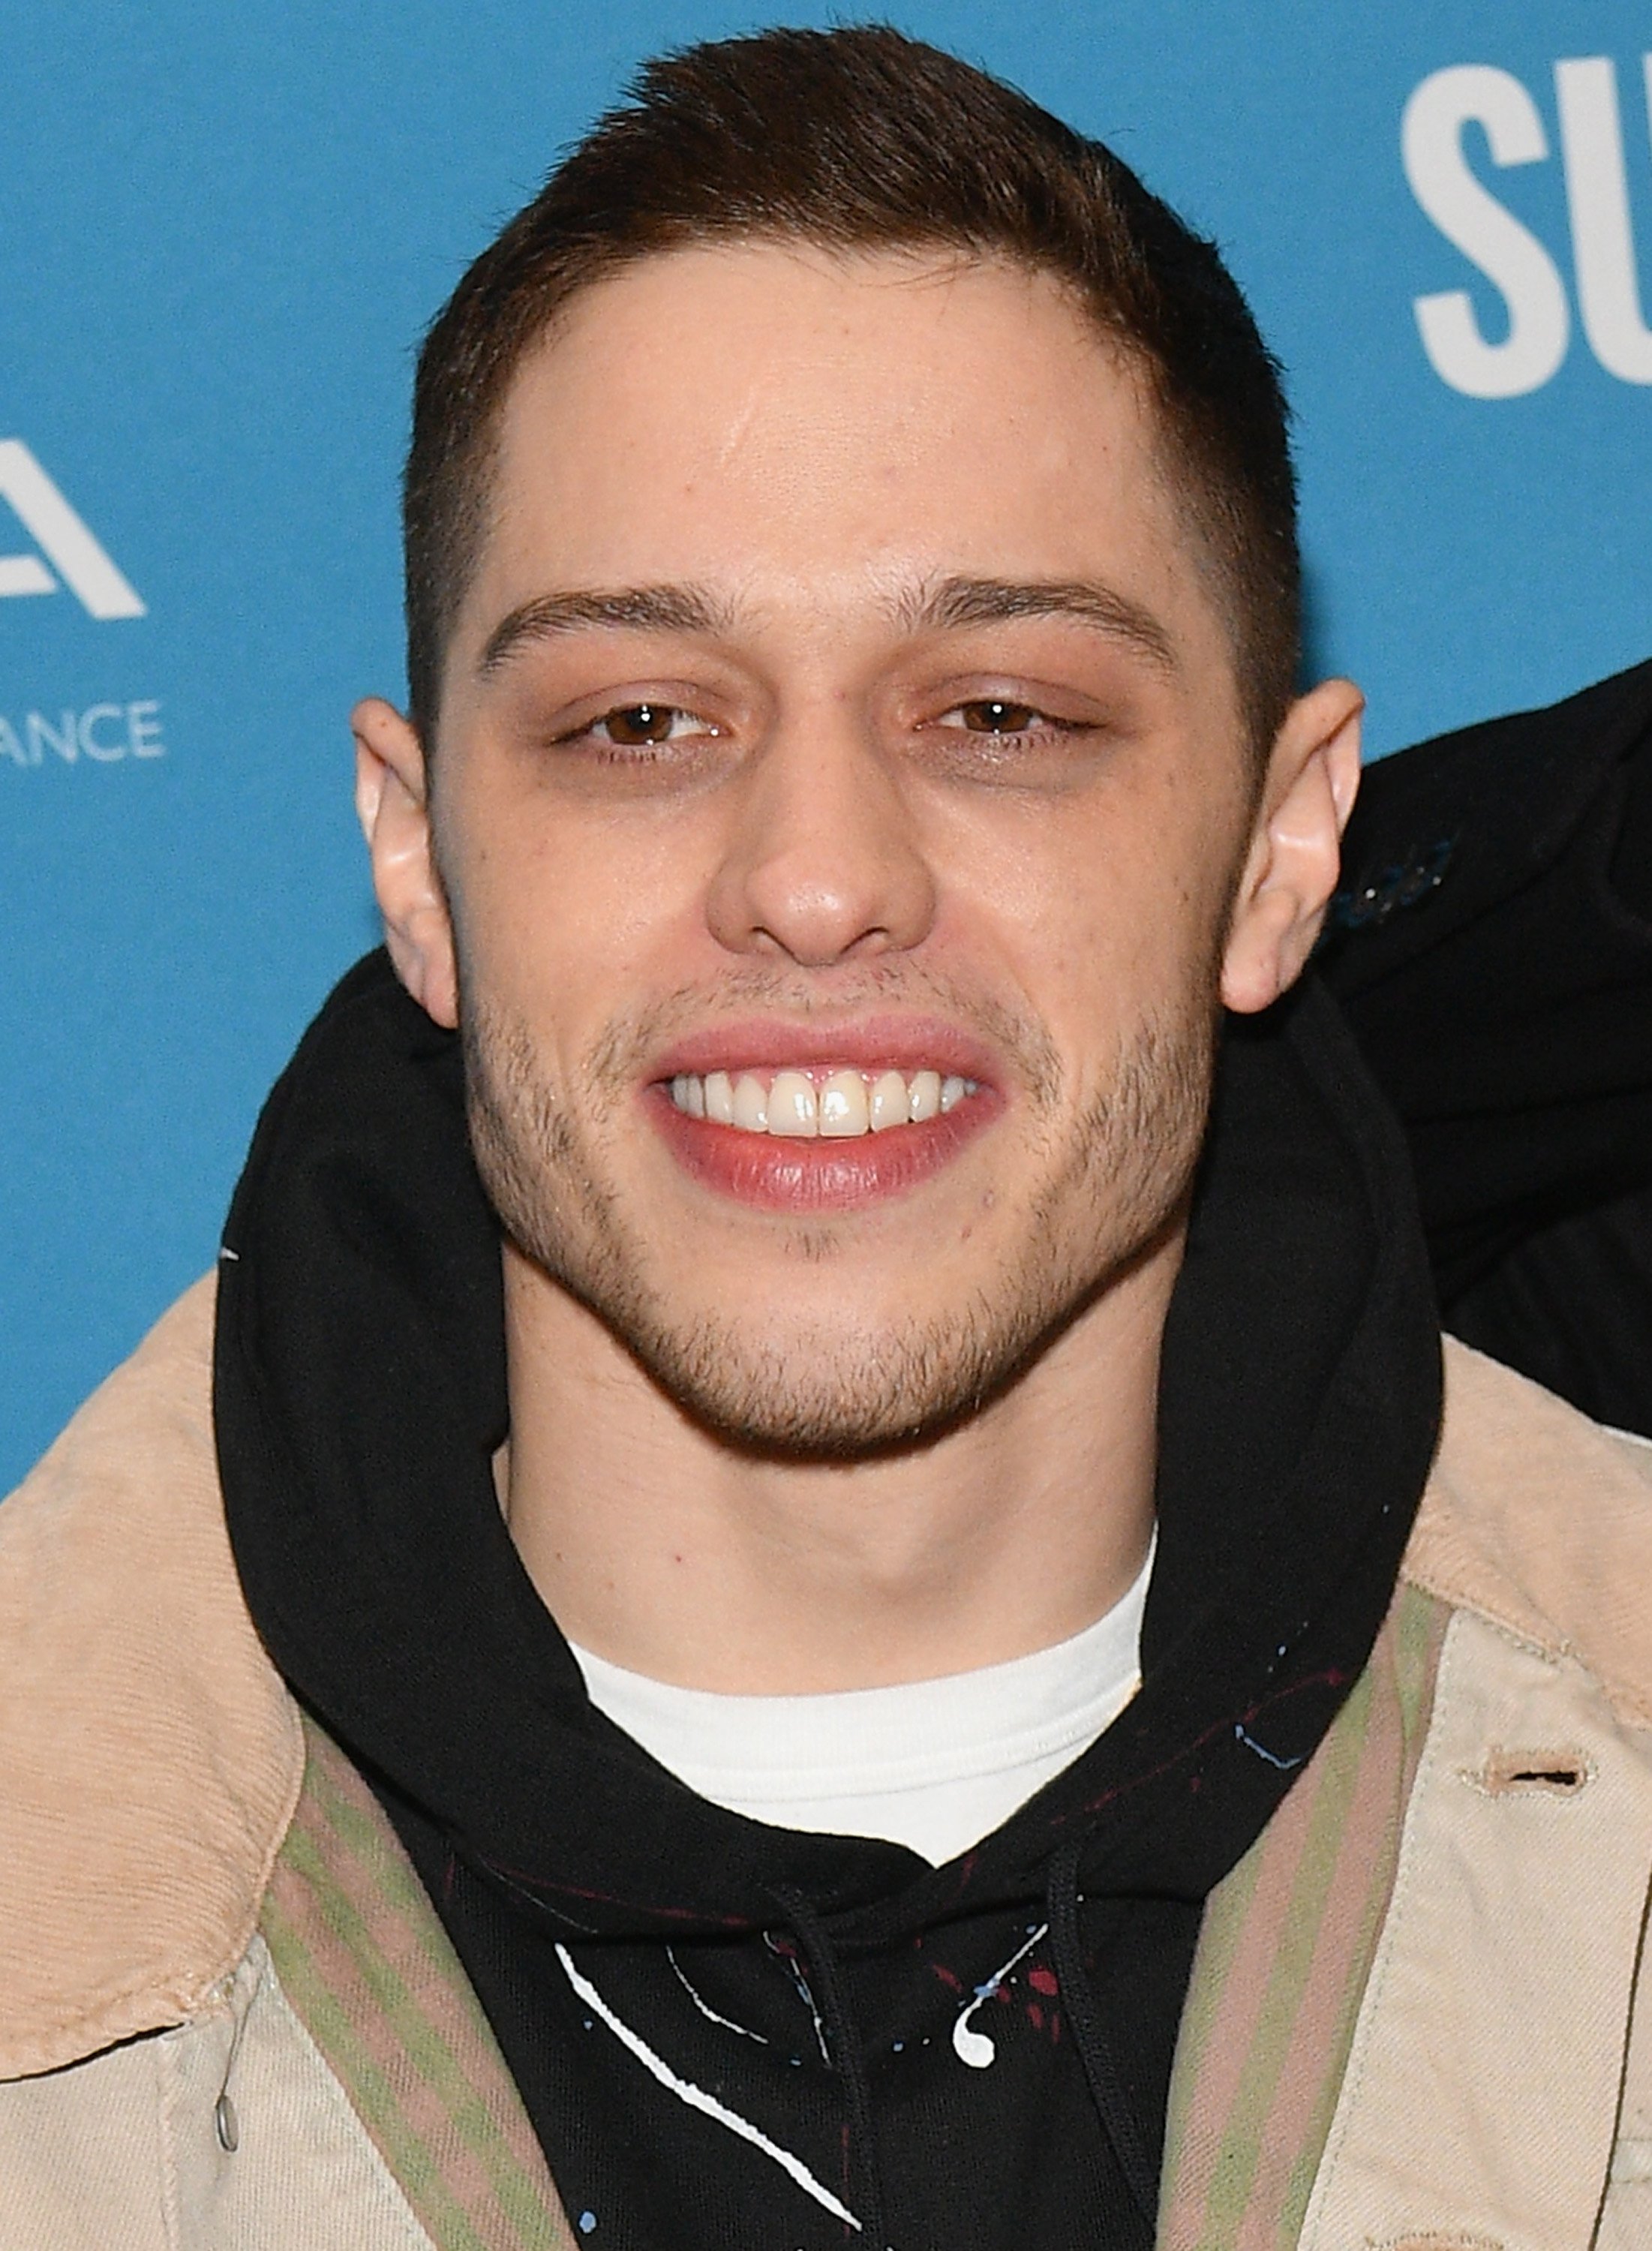 Pete Davidson attends the premiere of "Big Time Adolescence" at the 2019 Sundance Film Festival in Park City, Utah on January 28, 2019 | Photo: Getty Images